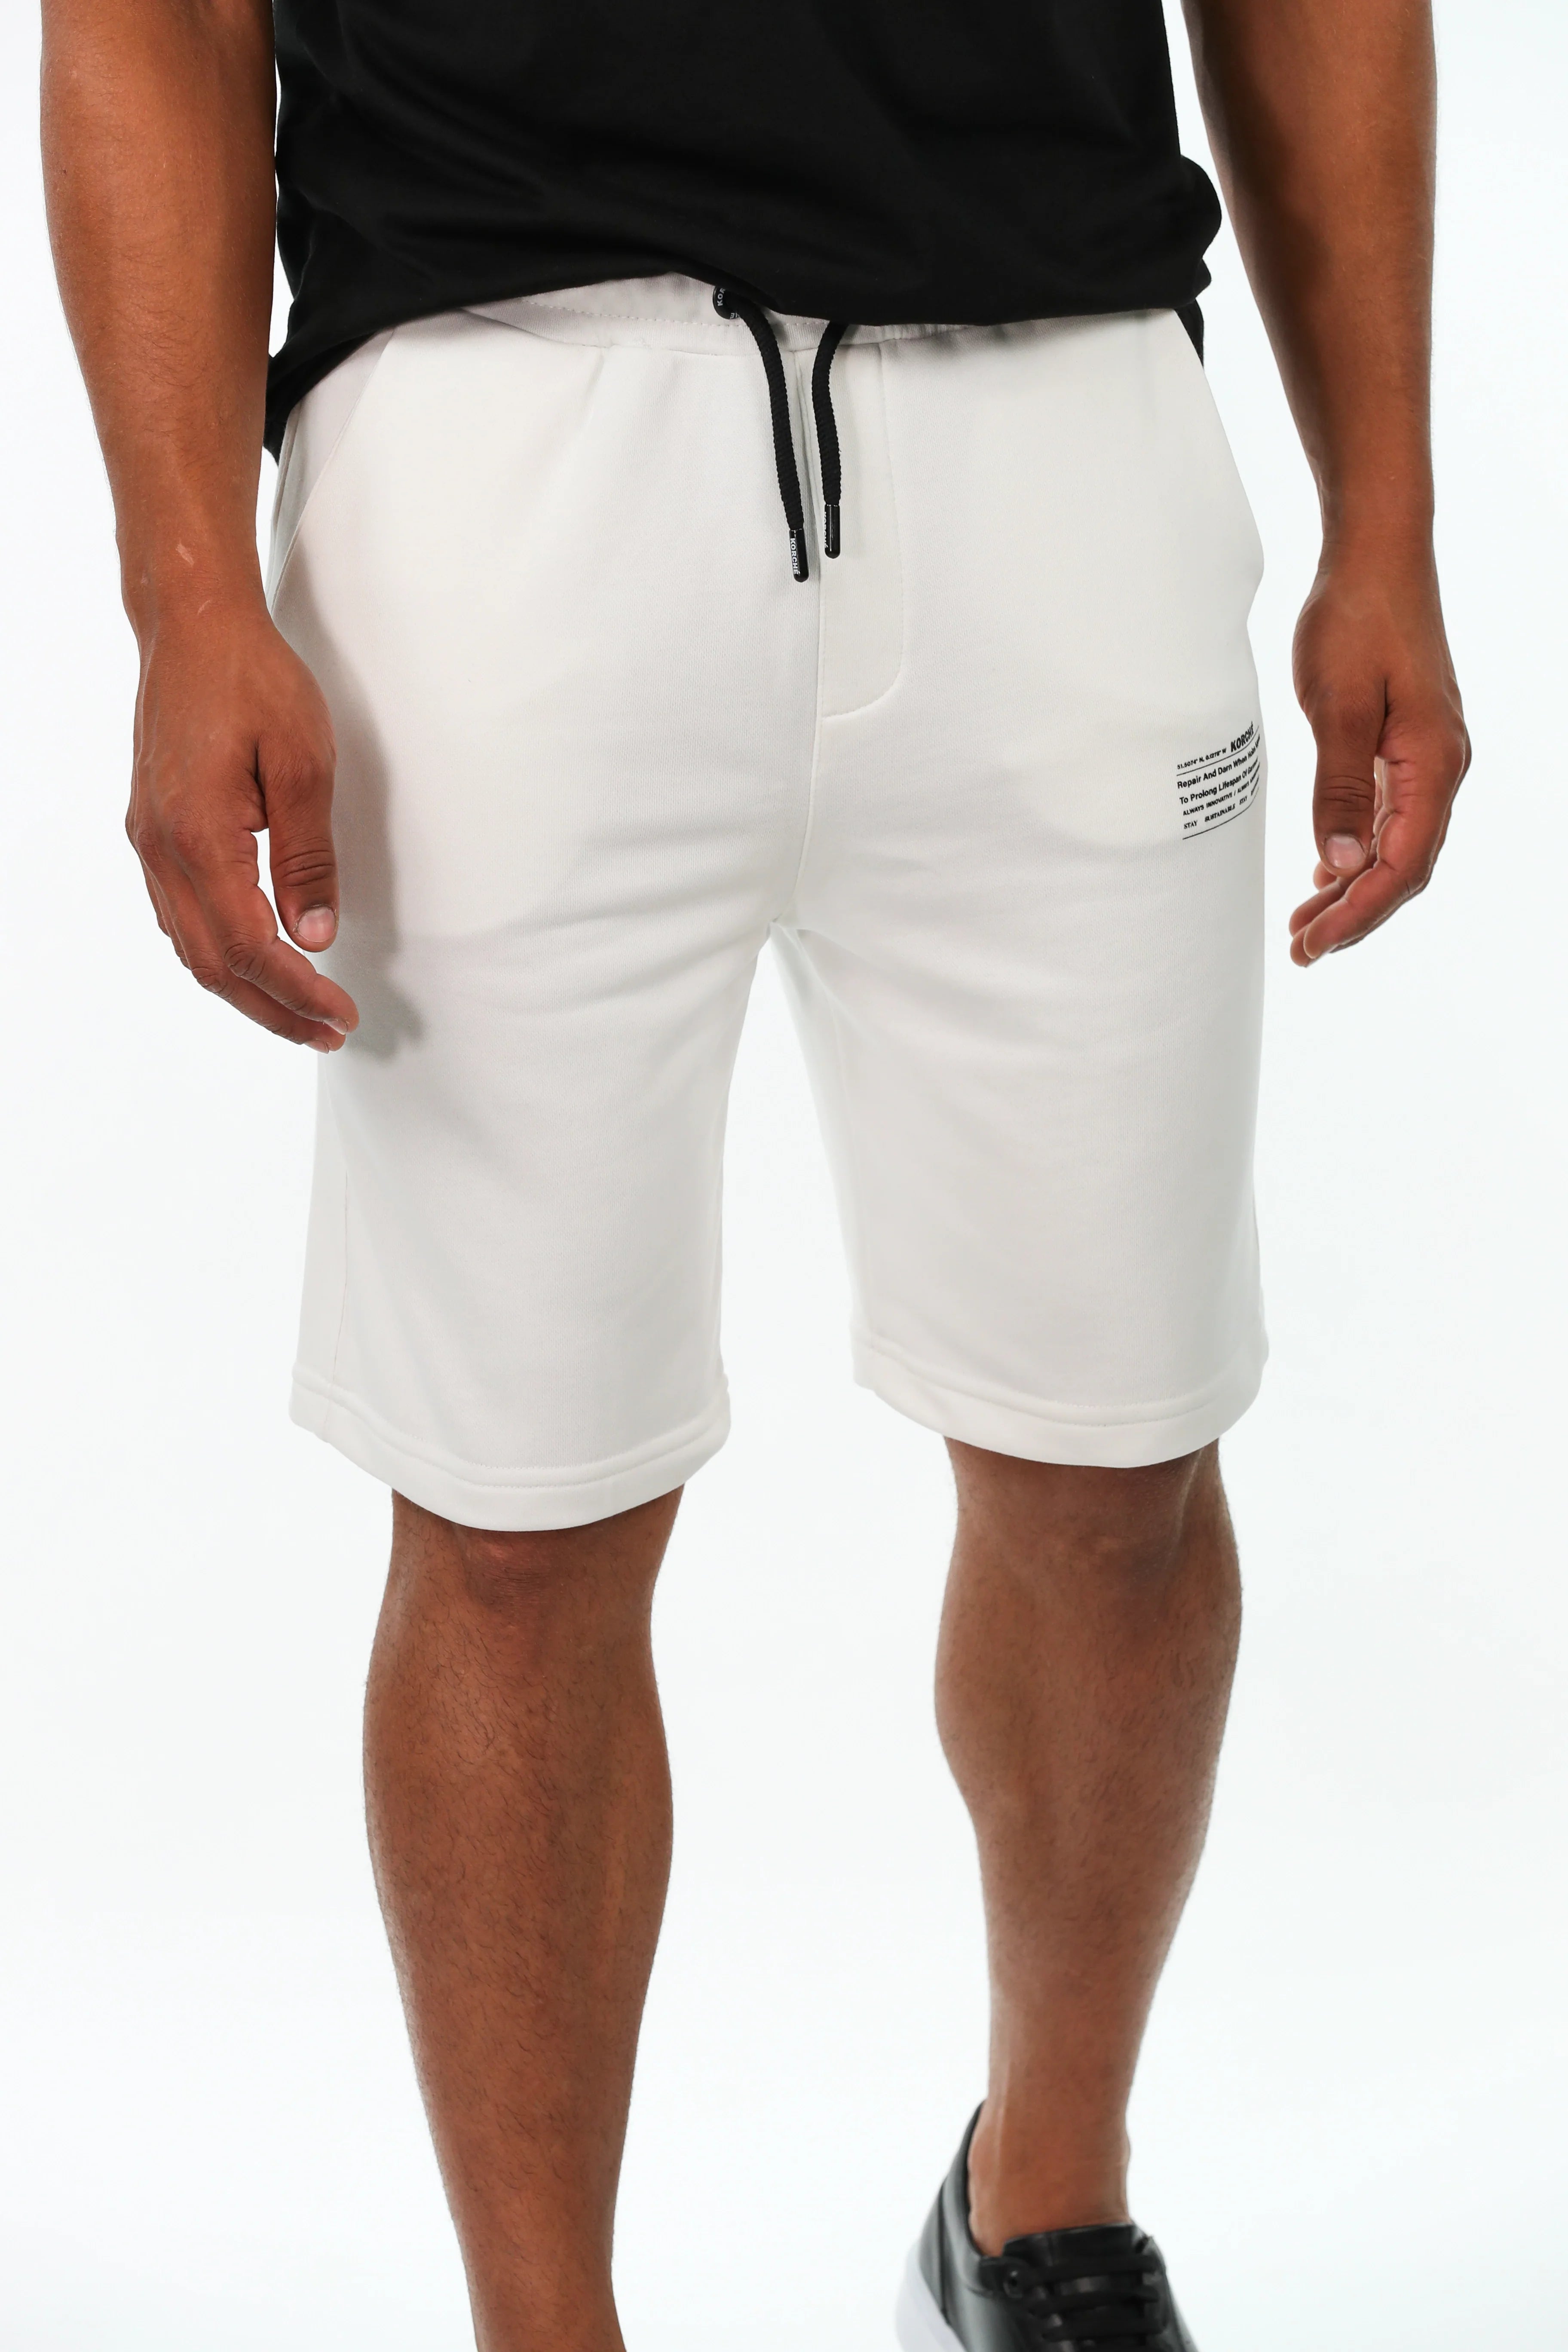 White Cotton Short With"Korshe"Front Design